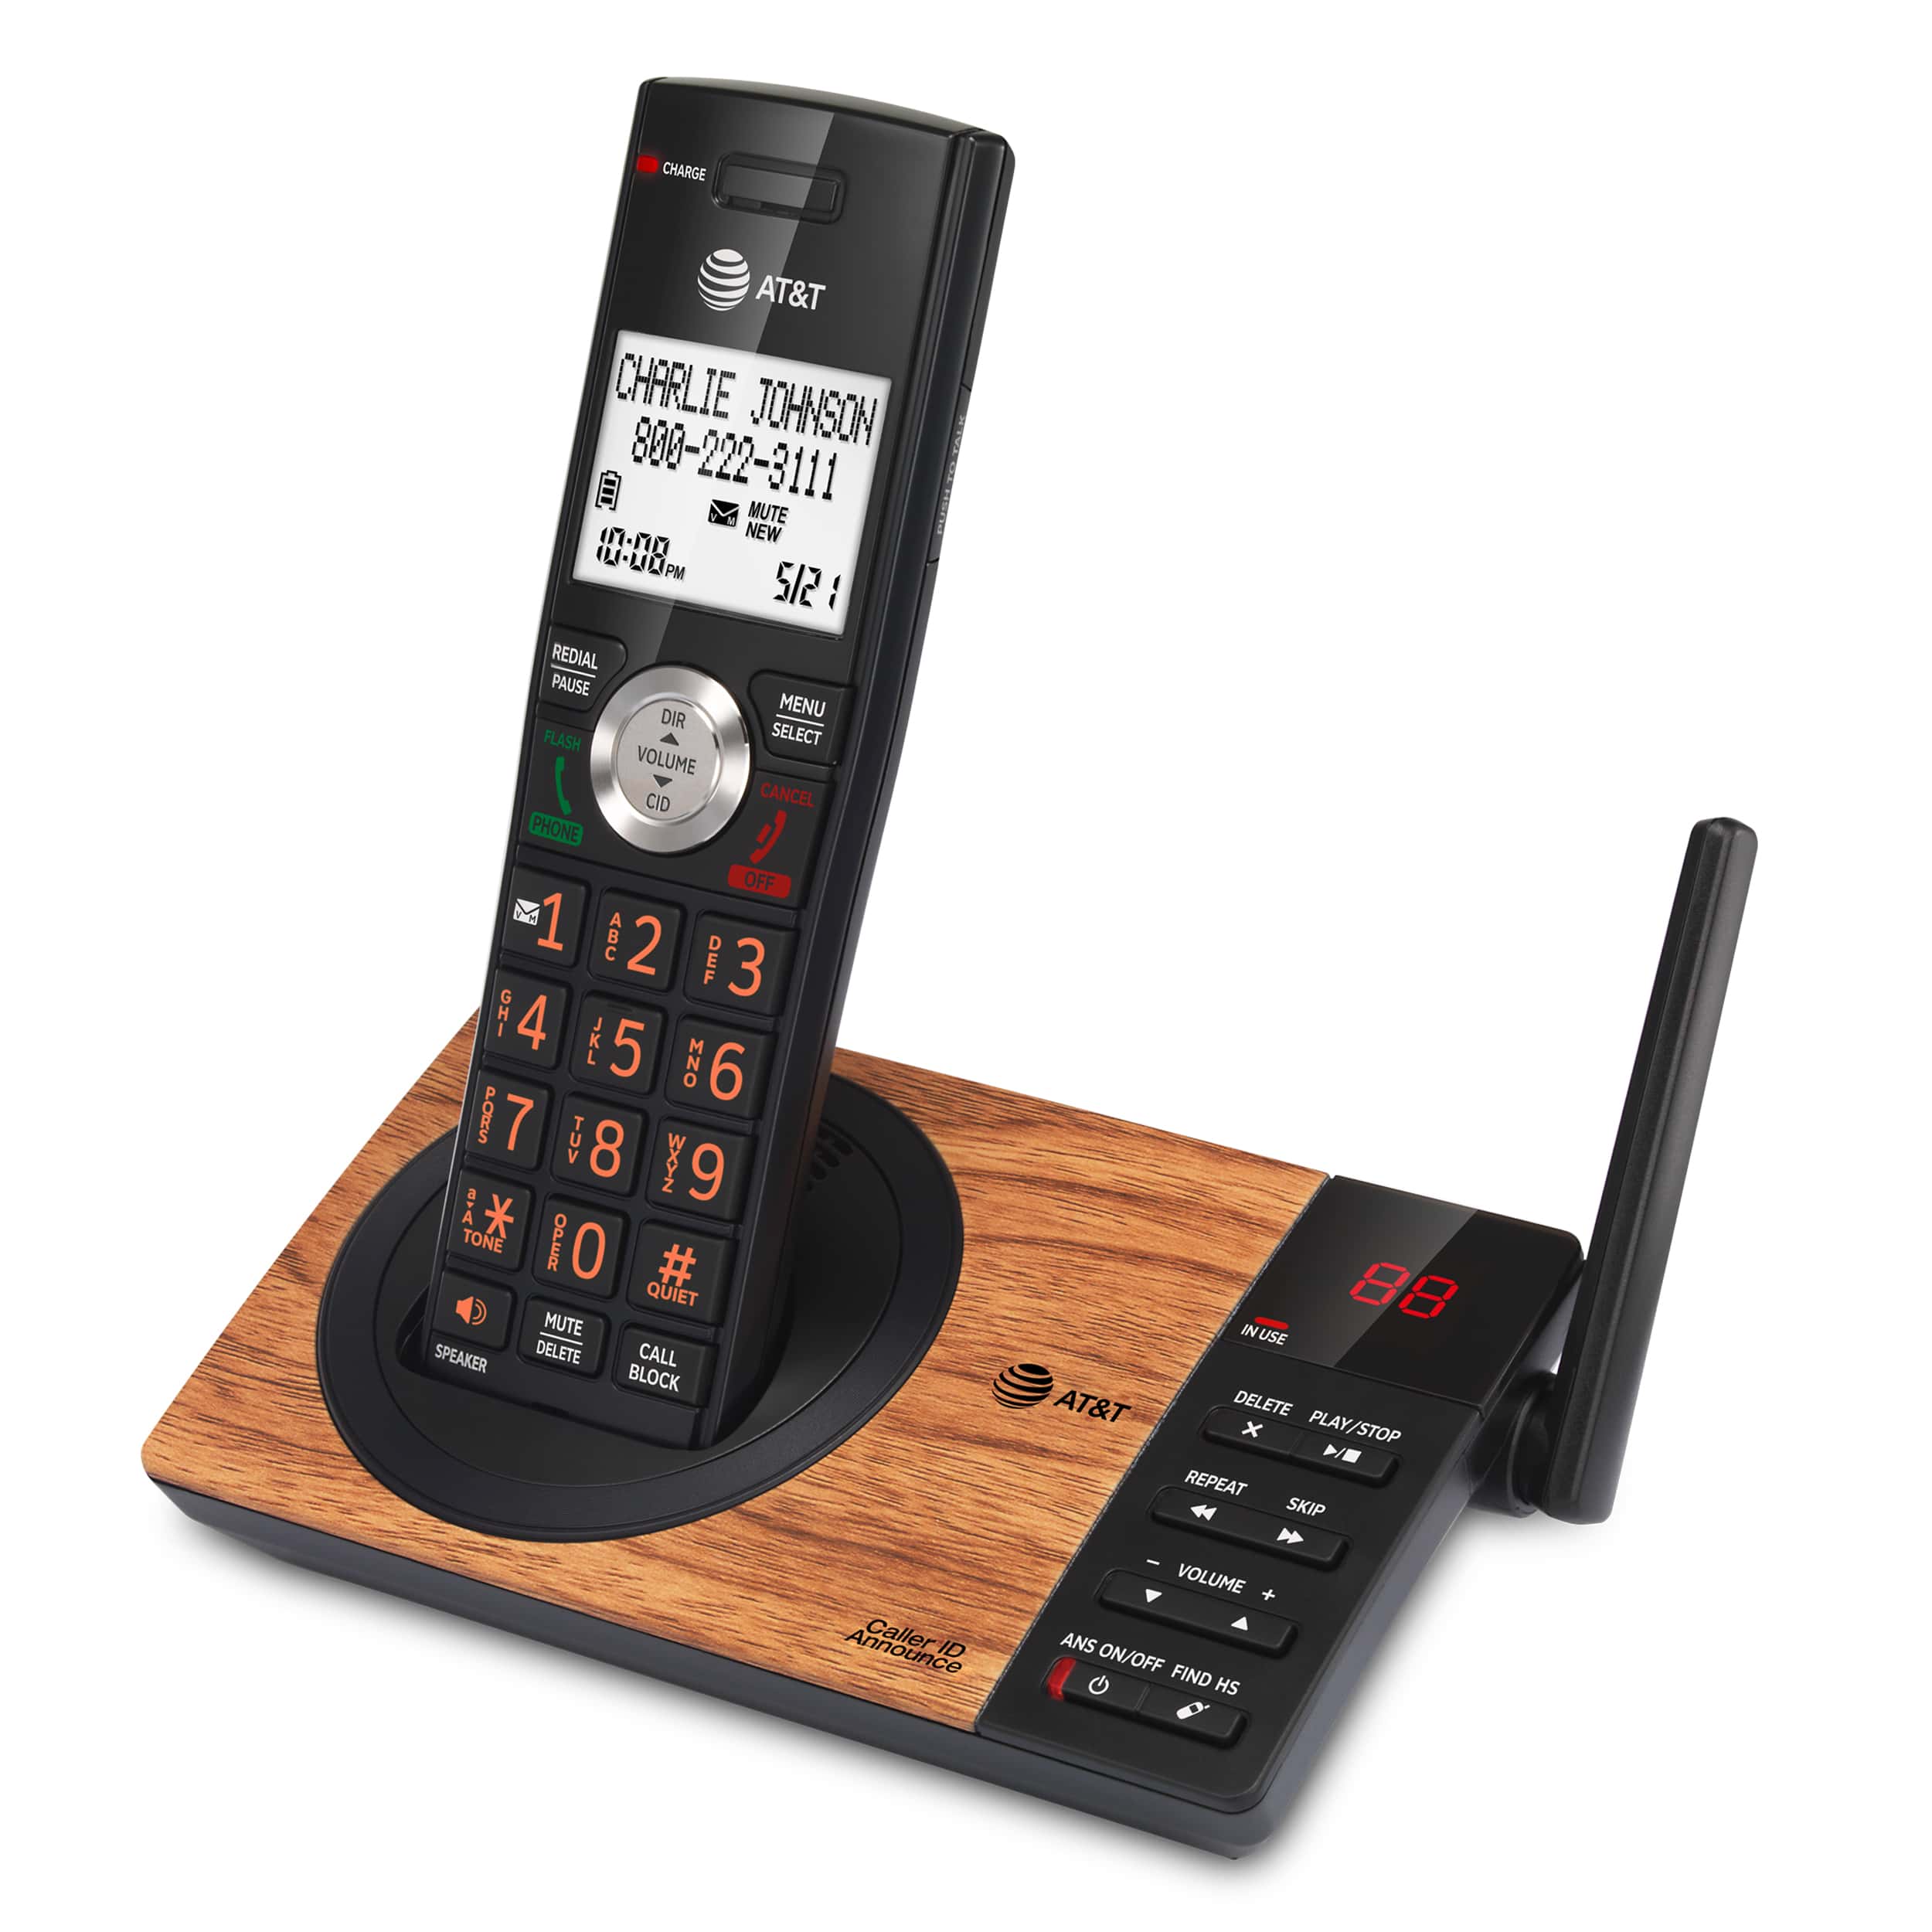 1-Handset Expandable Cordless Phone with Unsurpassed Range, Smart Call Blocker and Answering System - view 3